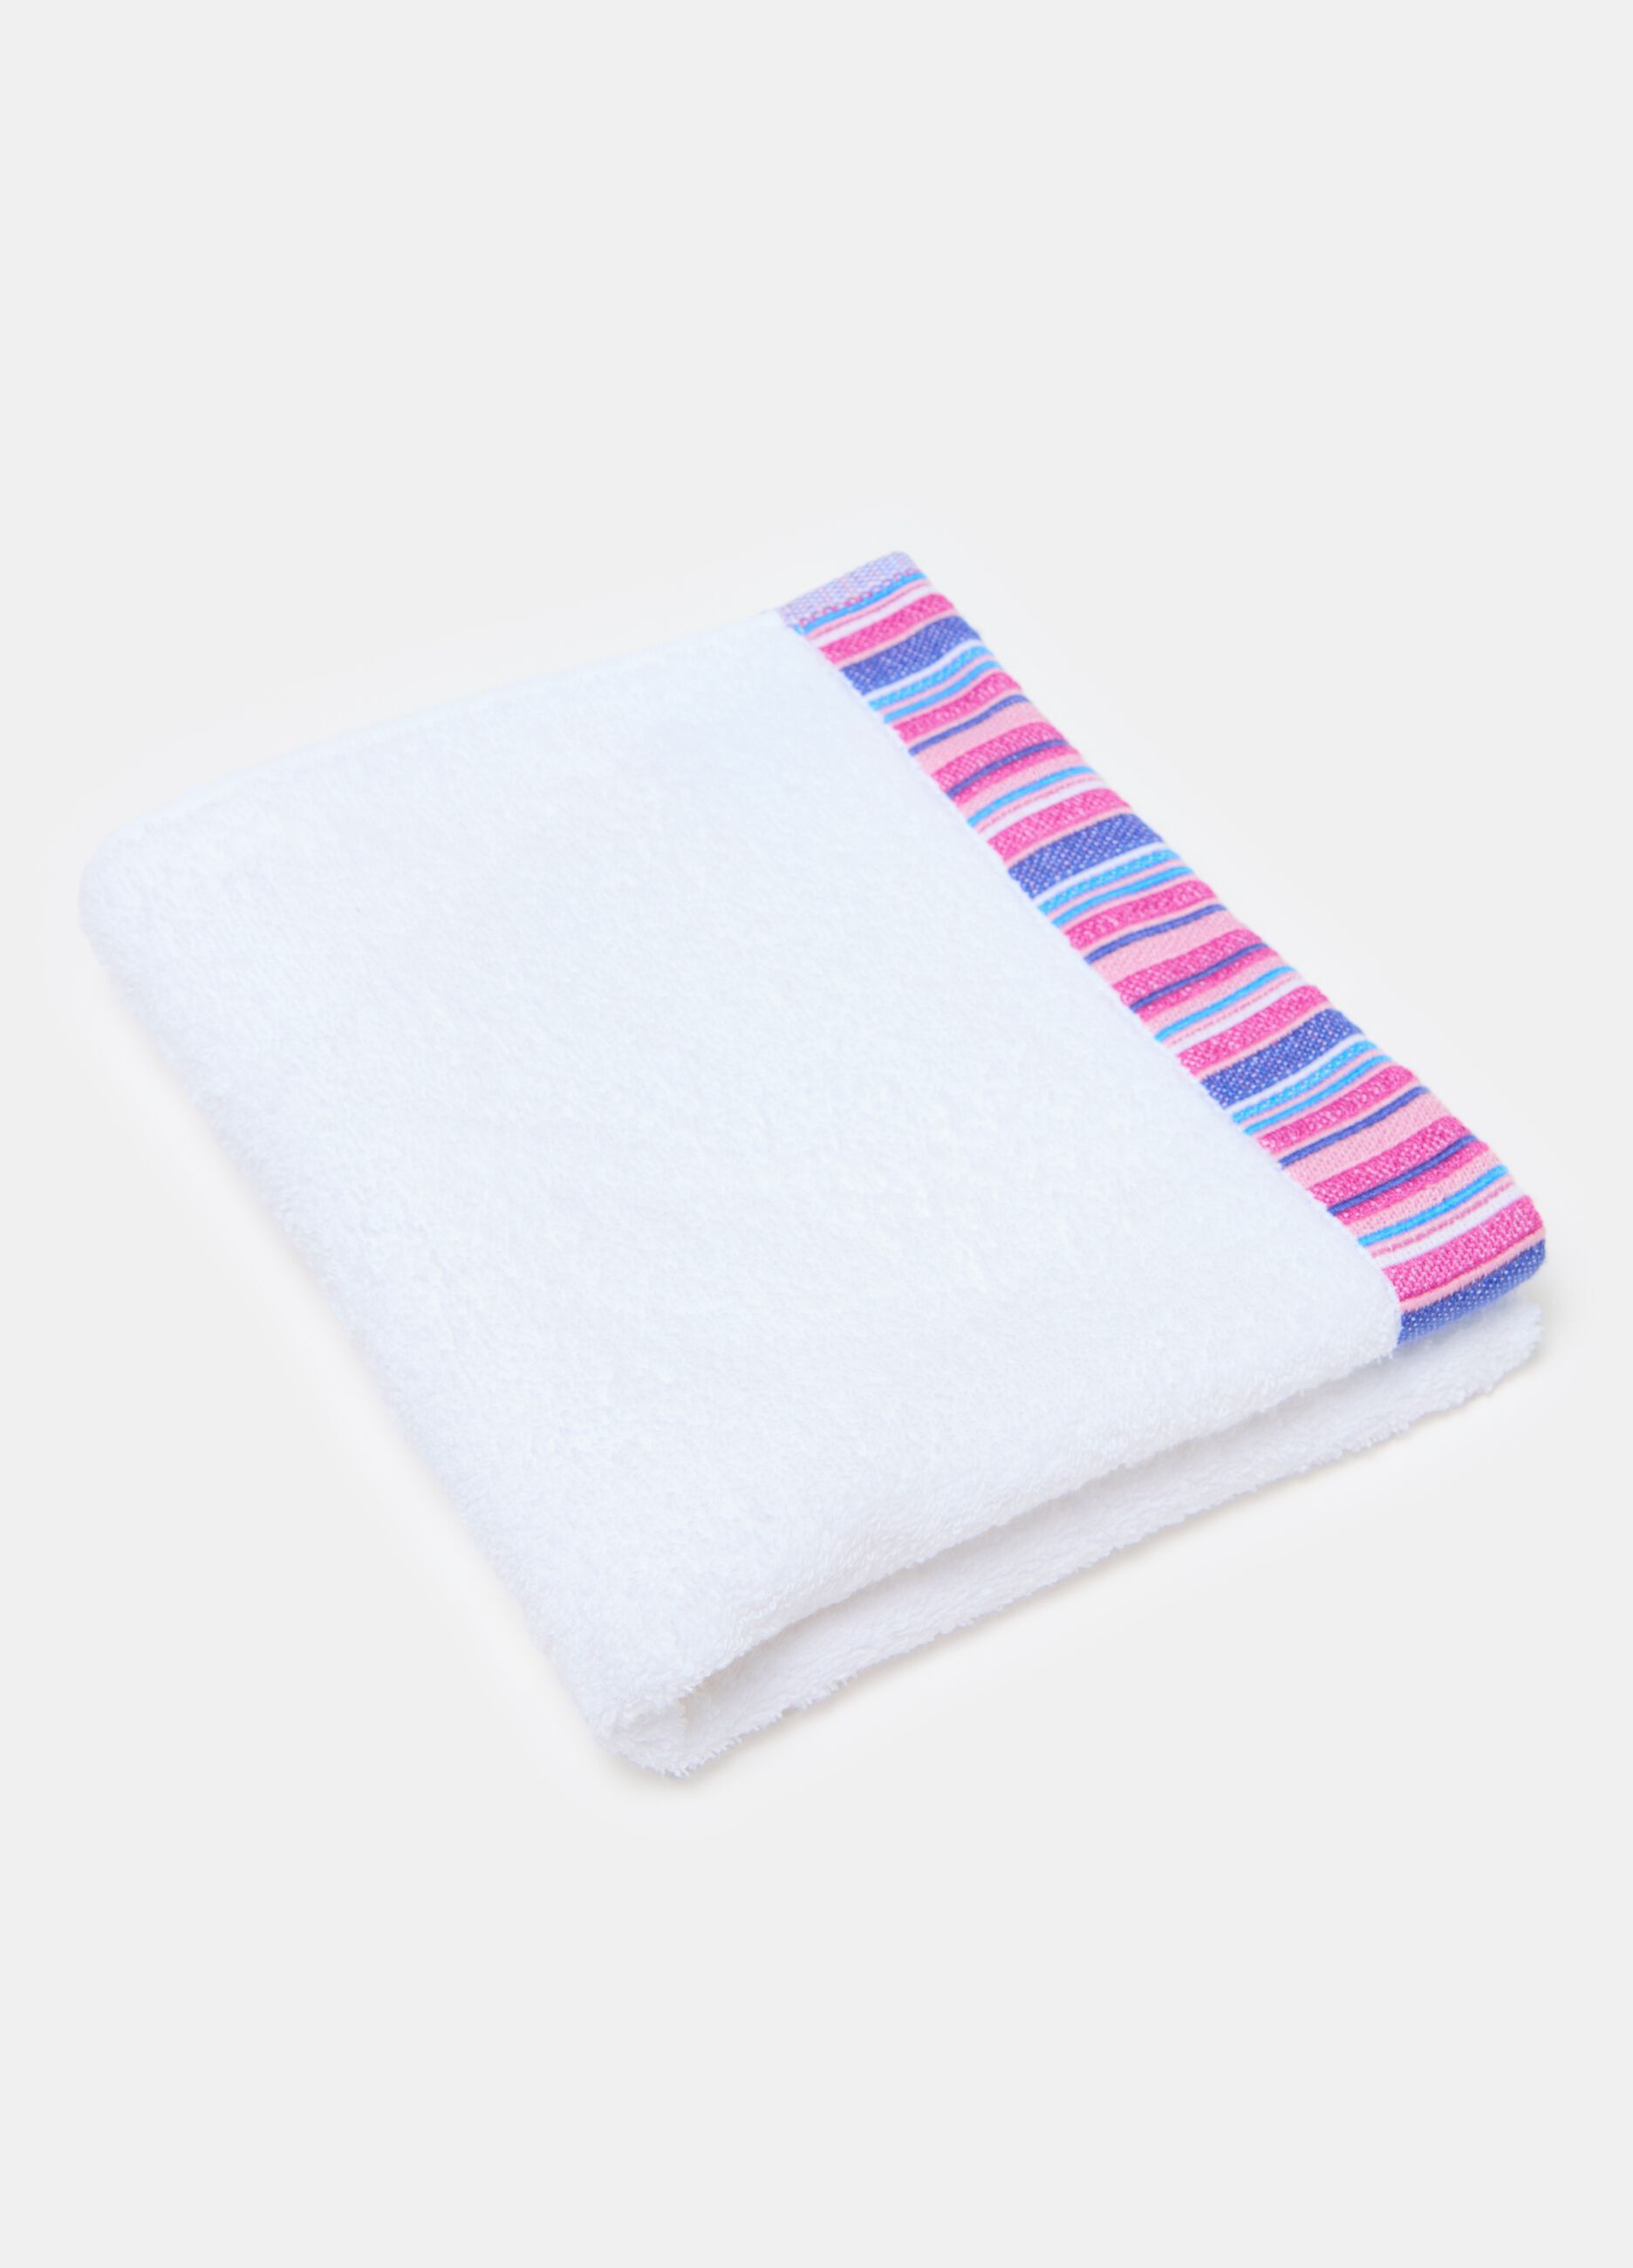 Solid colour face towel with contrasting striped trim